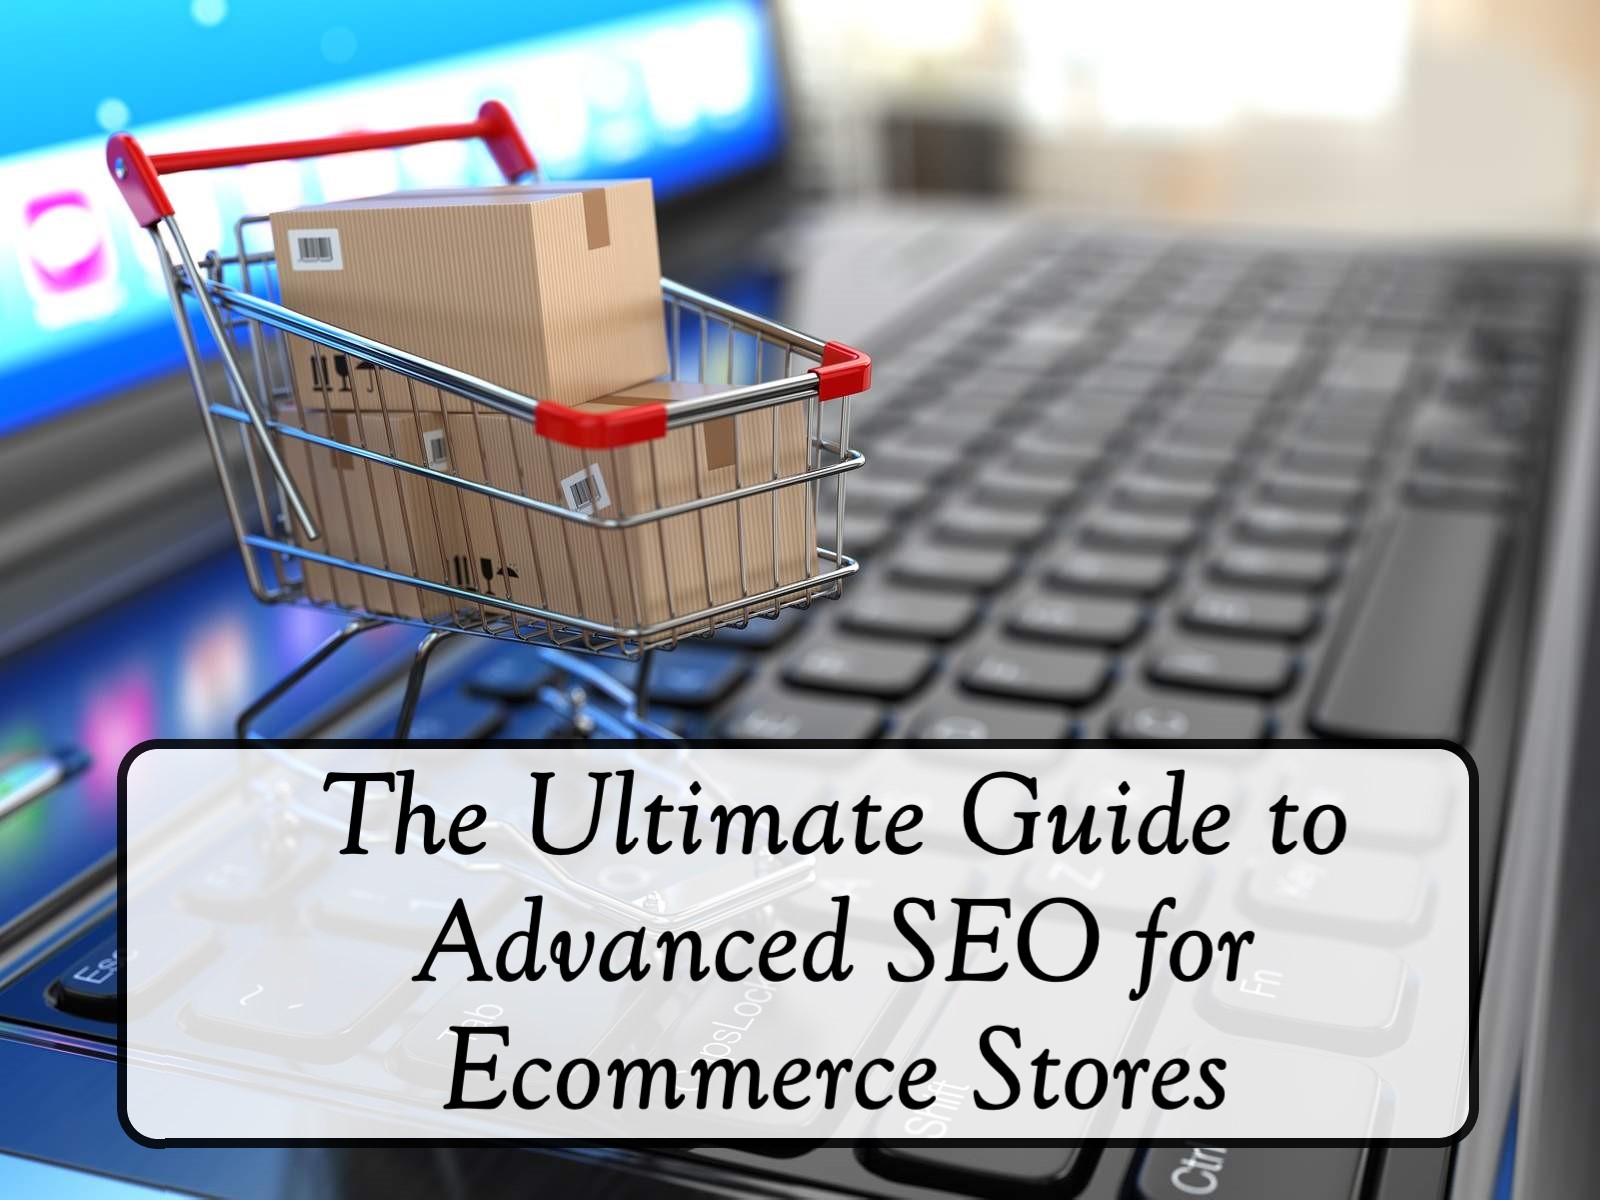 The Ultimate Guide to Advanced SEO for Ecommerce Stores